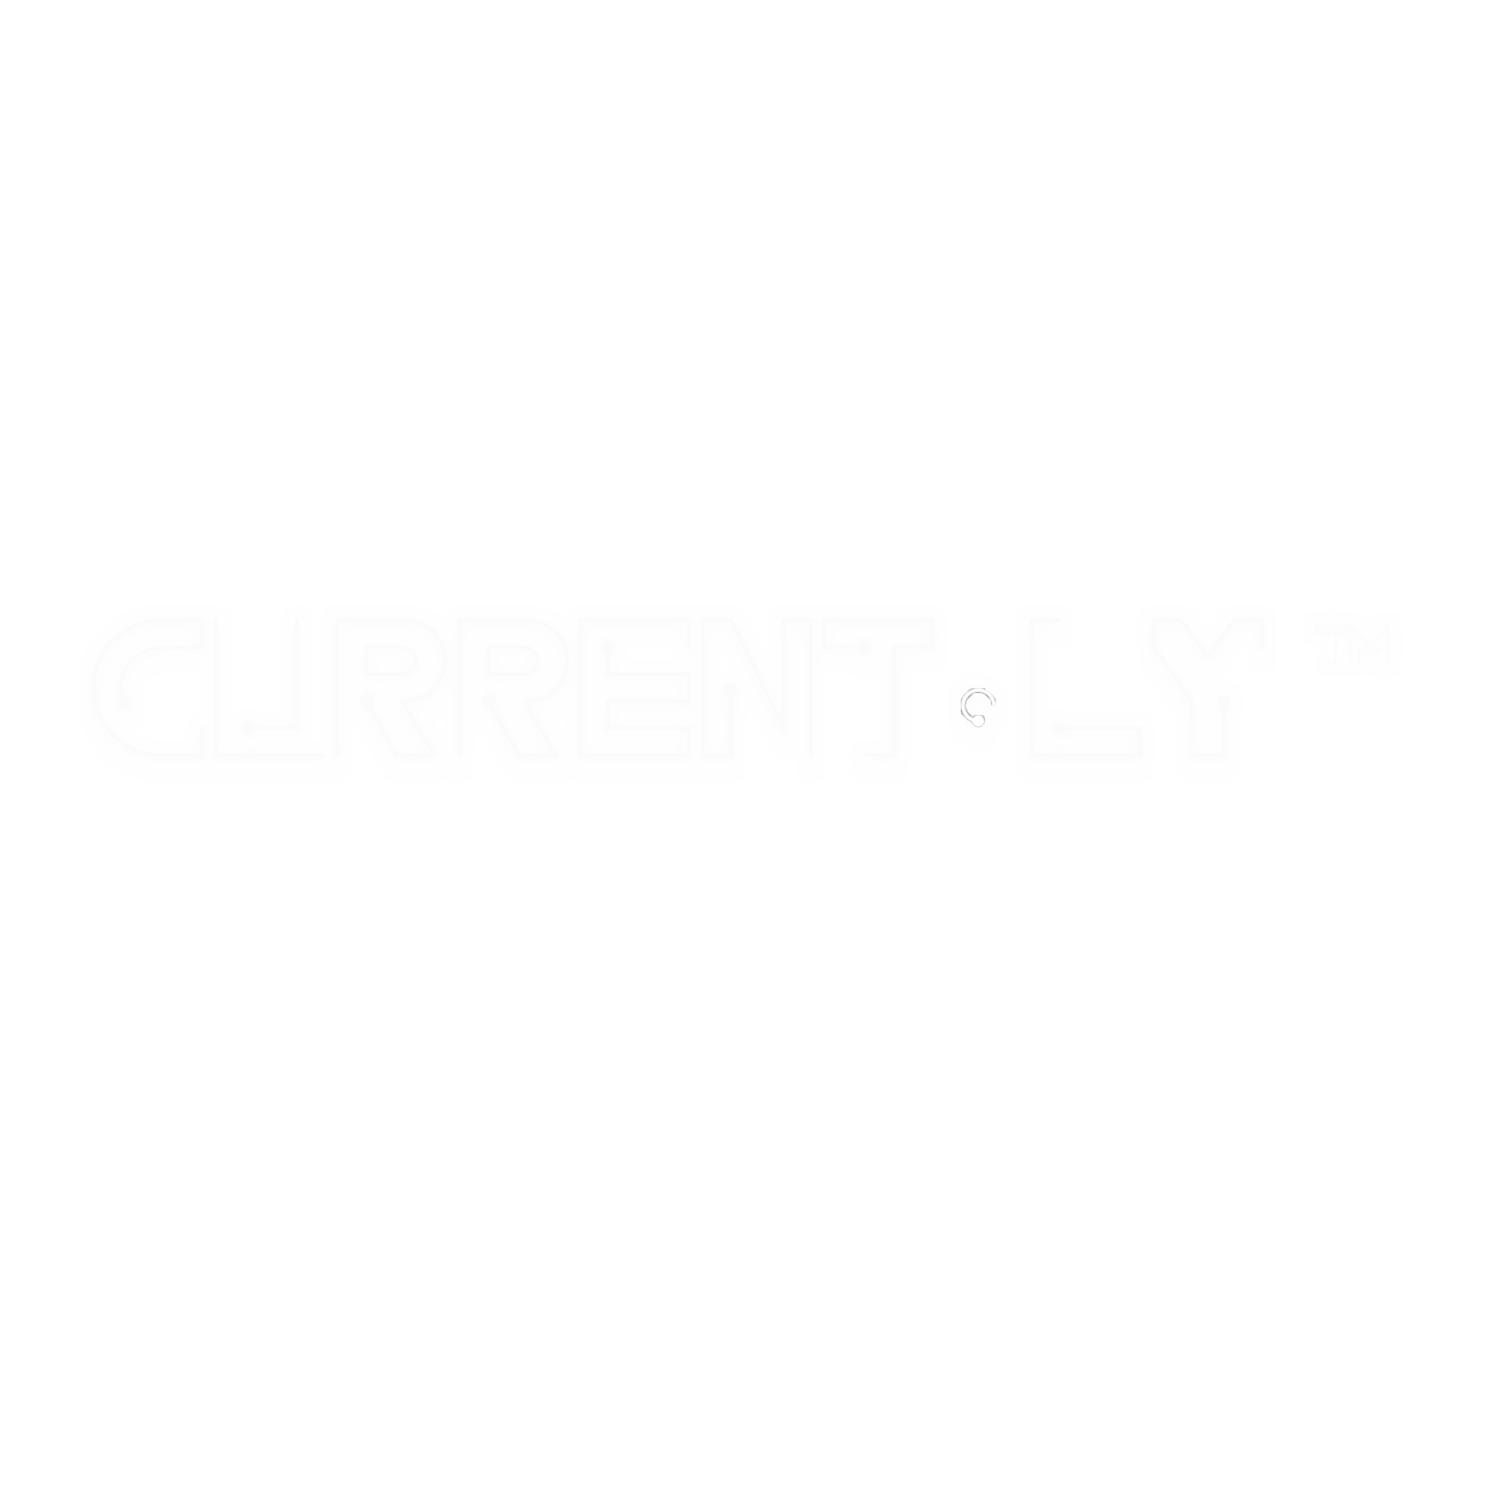 CURRENT•LY Global Inc. | An International Creative Consulting Agency